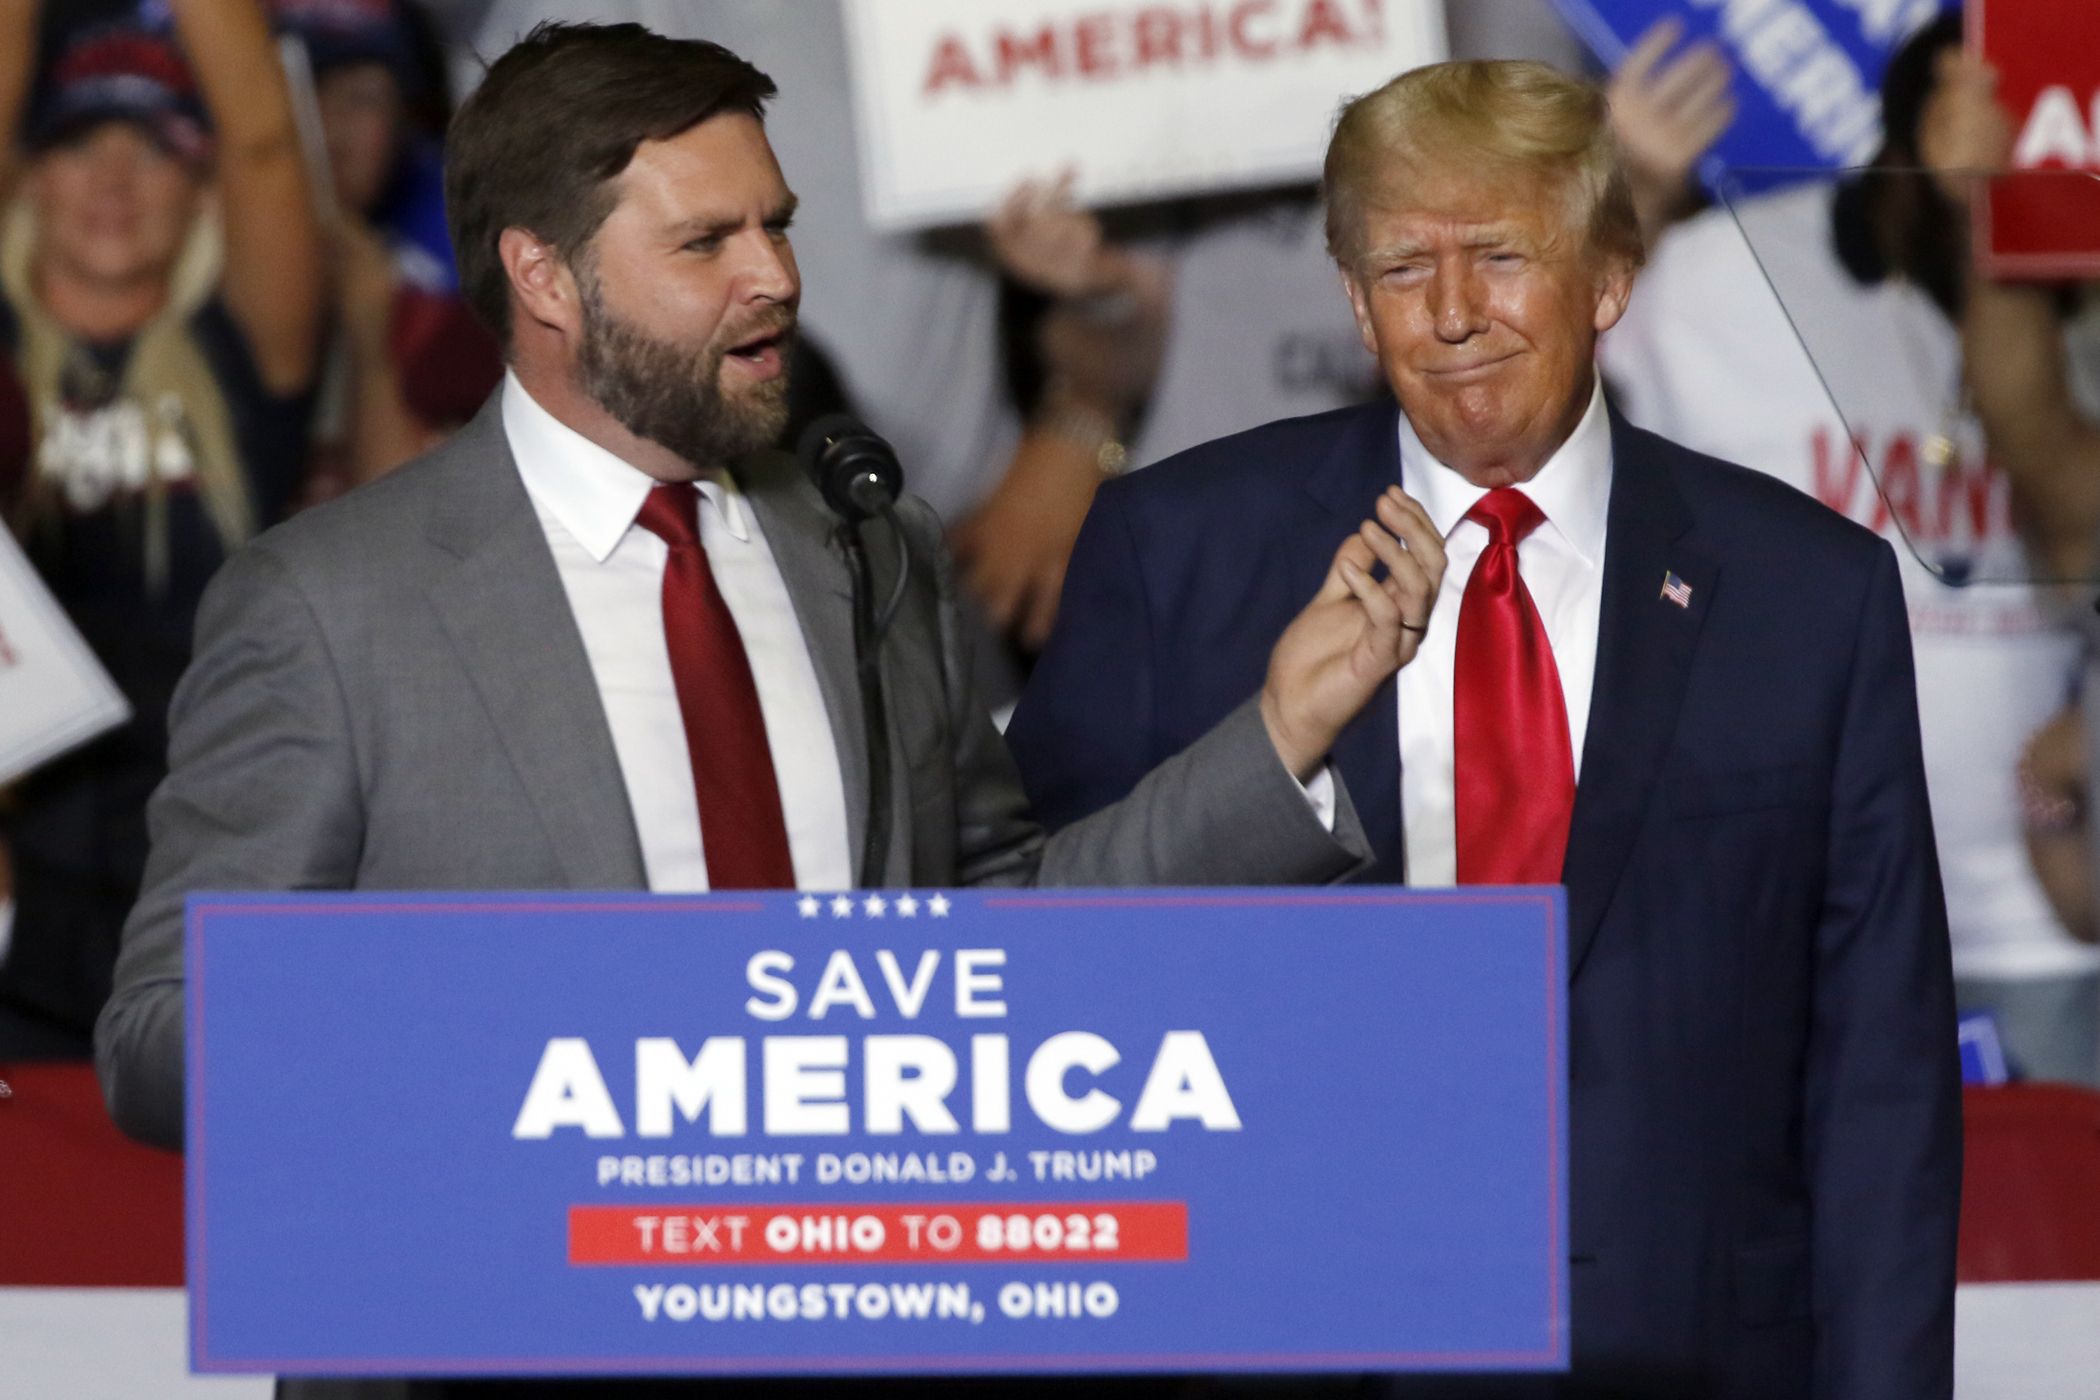 J.D. Vance and Donald Trump stand behind a podium that says "Save America," with Vance speaking